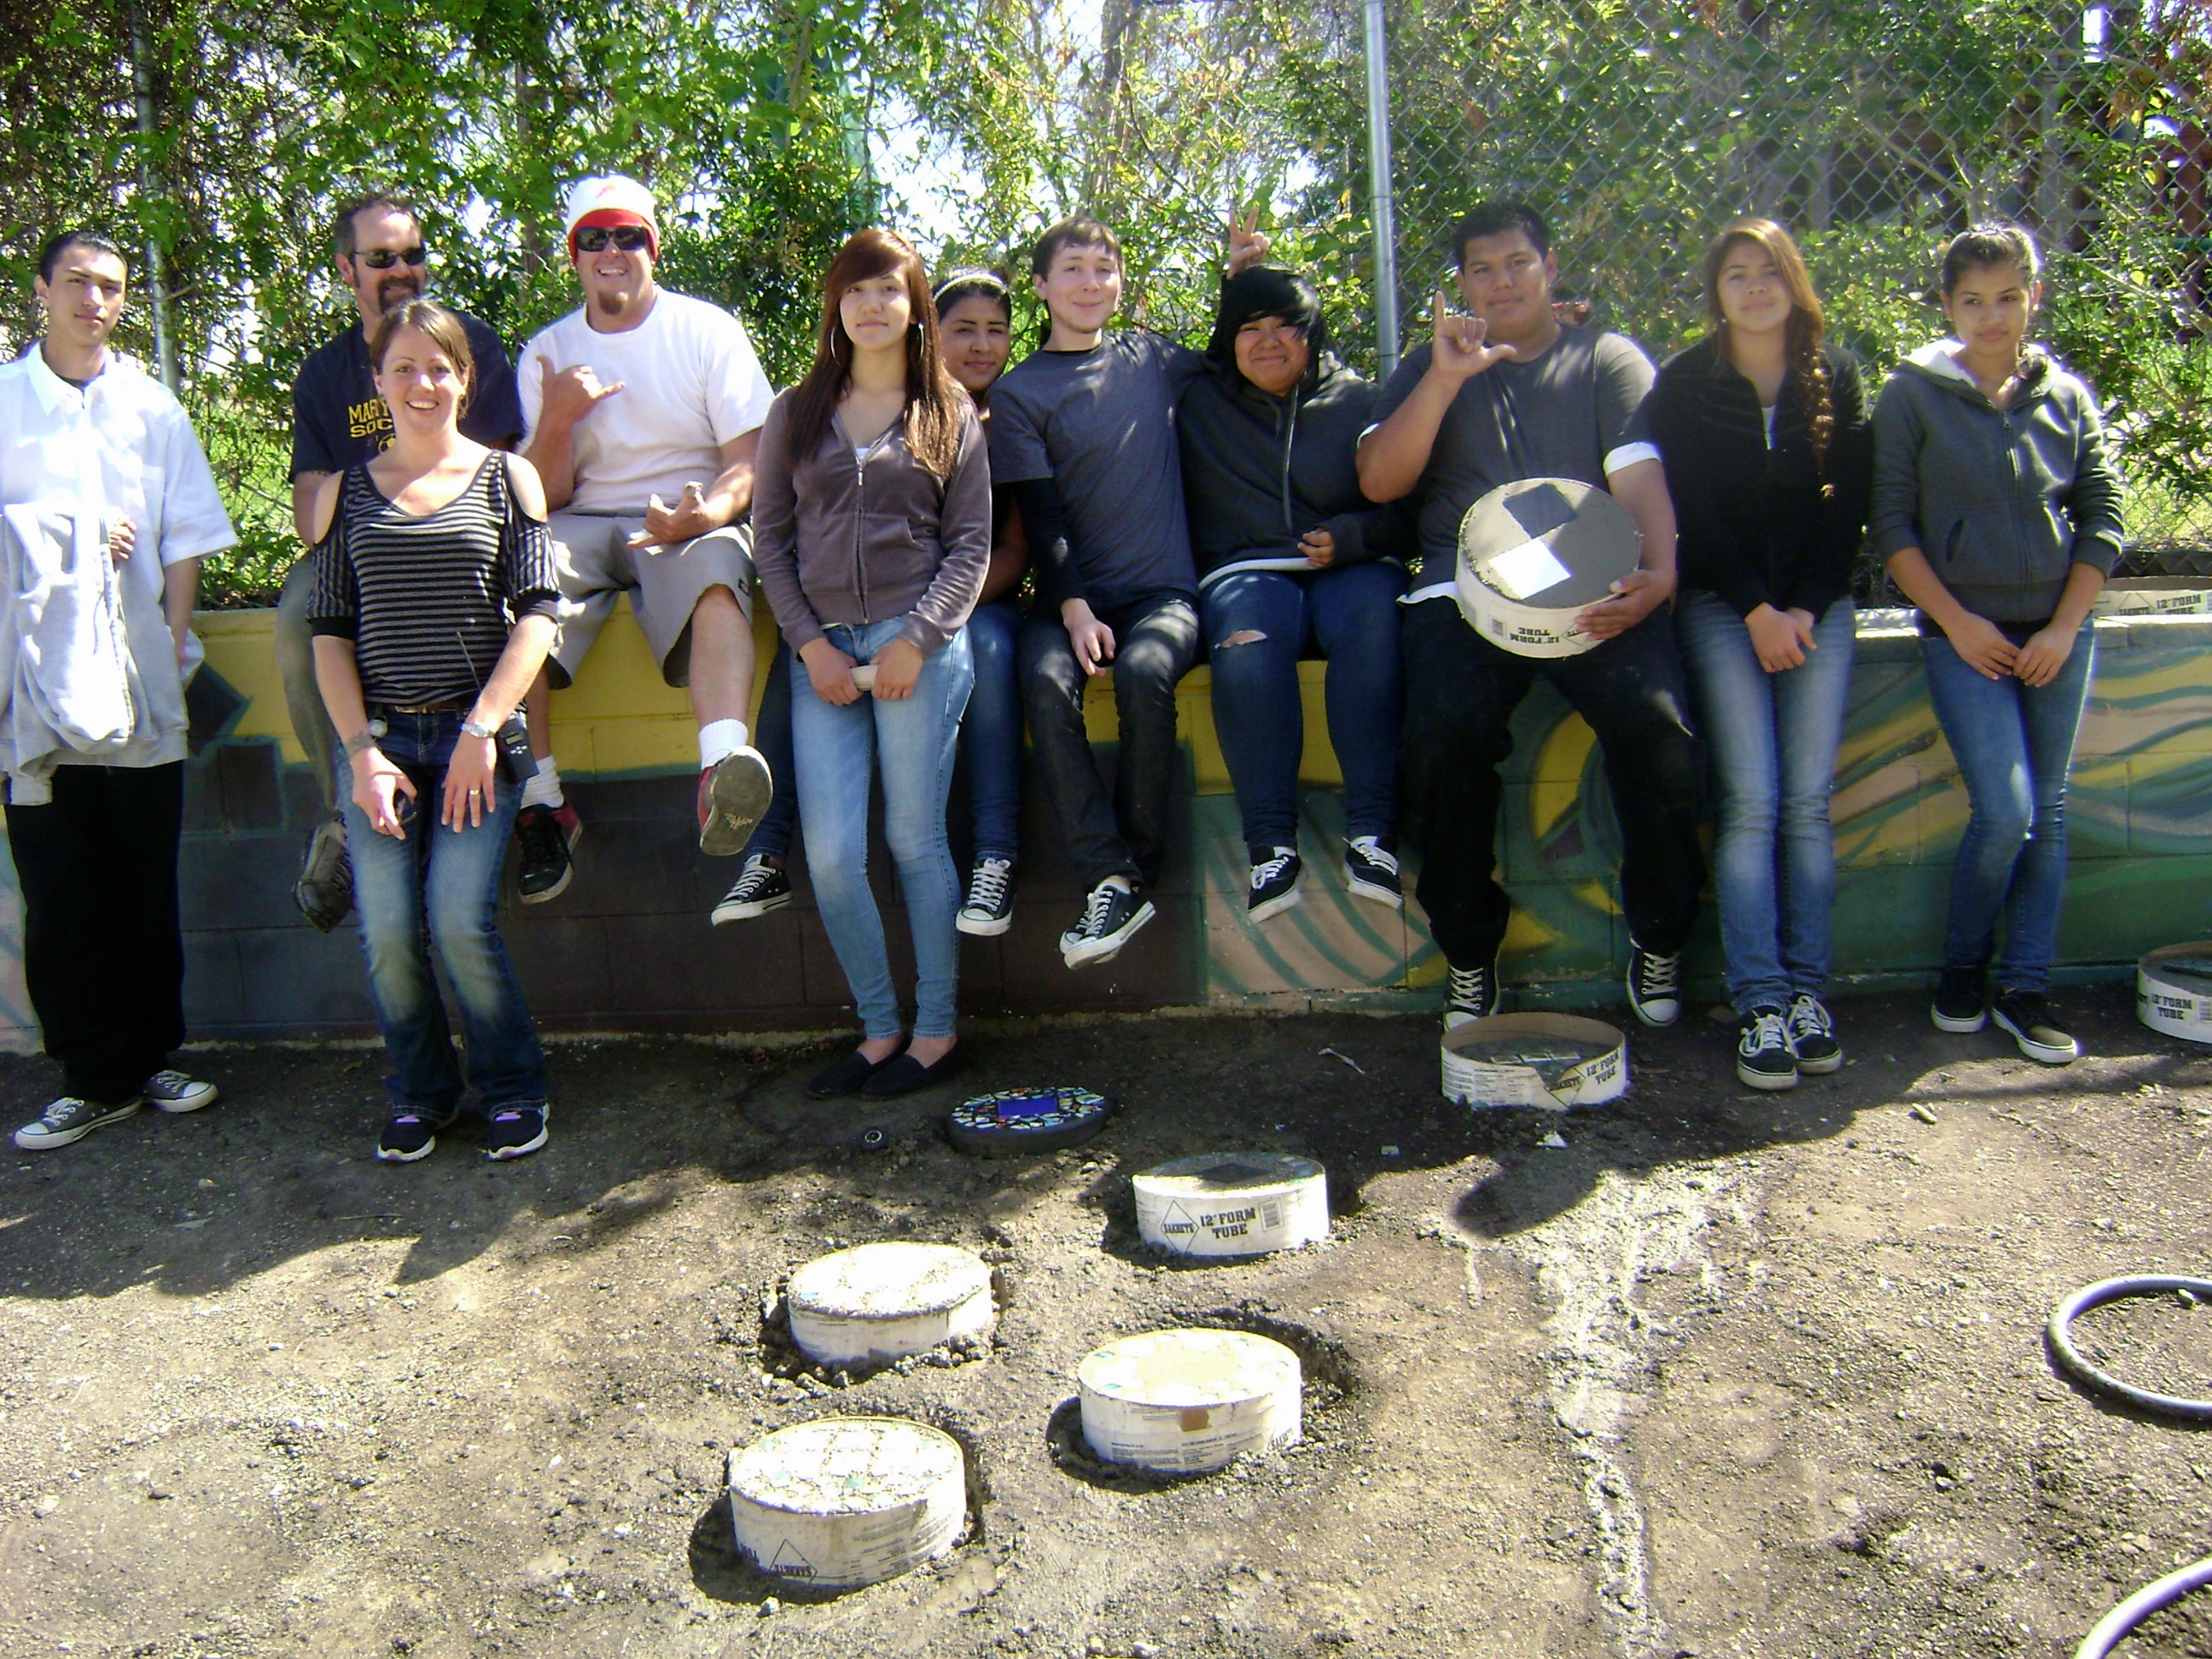 New School students using donated supplies to make stepping stones